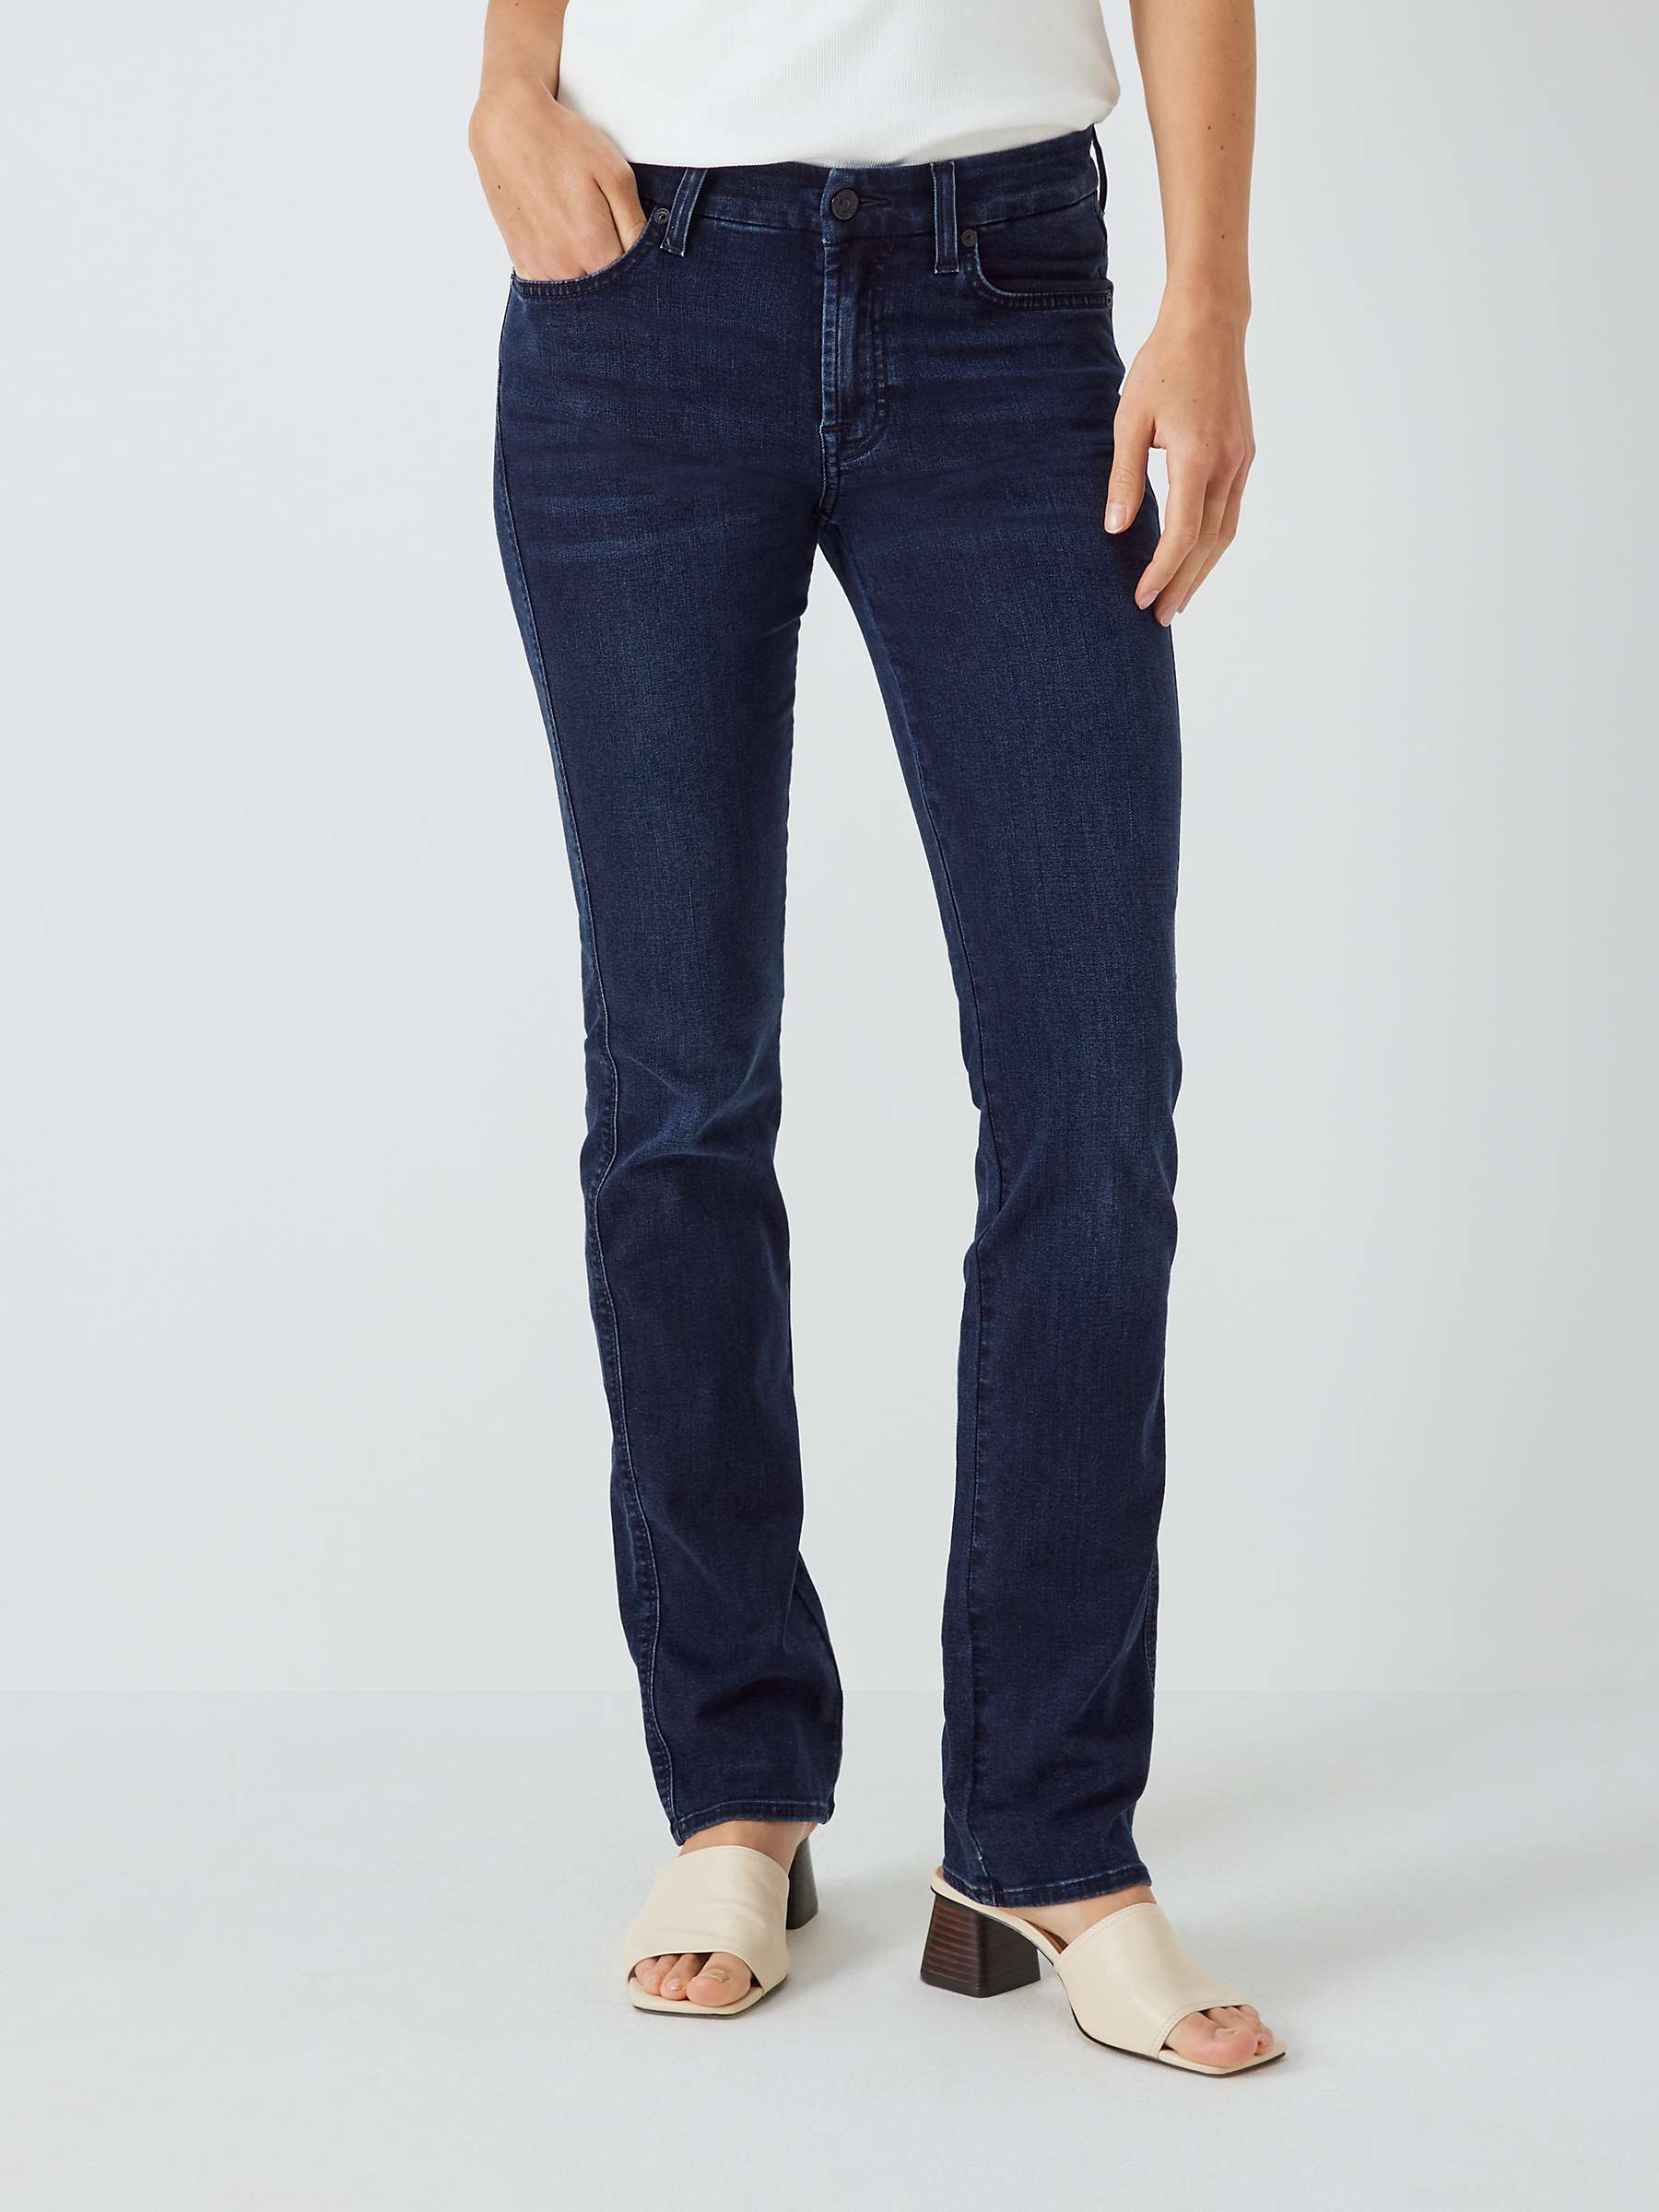 Buy 7 For All Mankind Kimmie B(Air) Jeans, Park Avenue Online at johnlewis.com